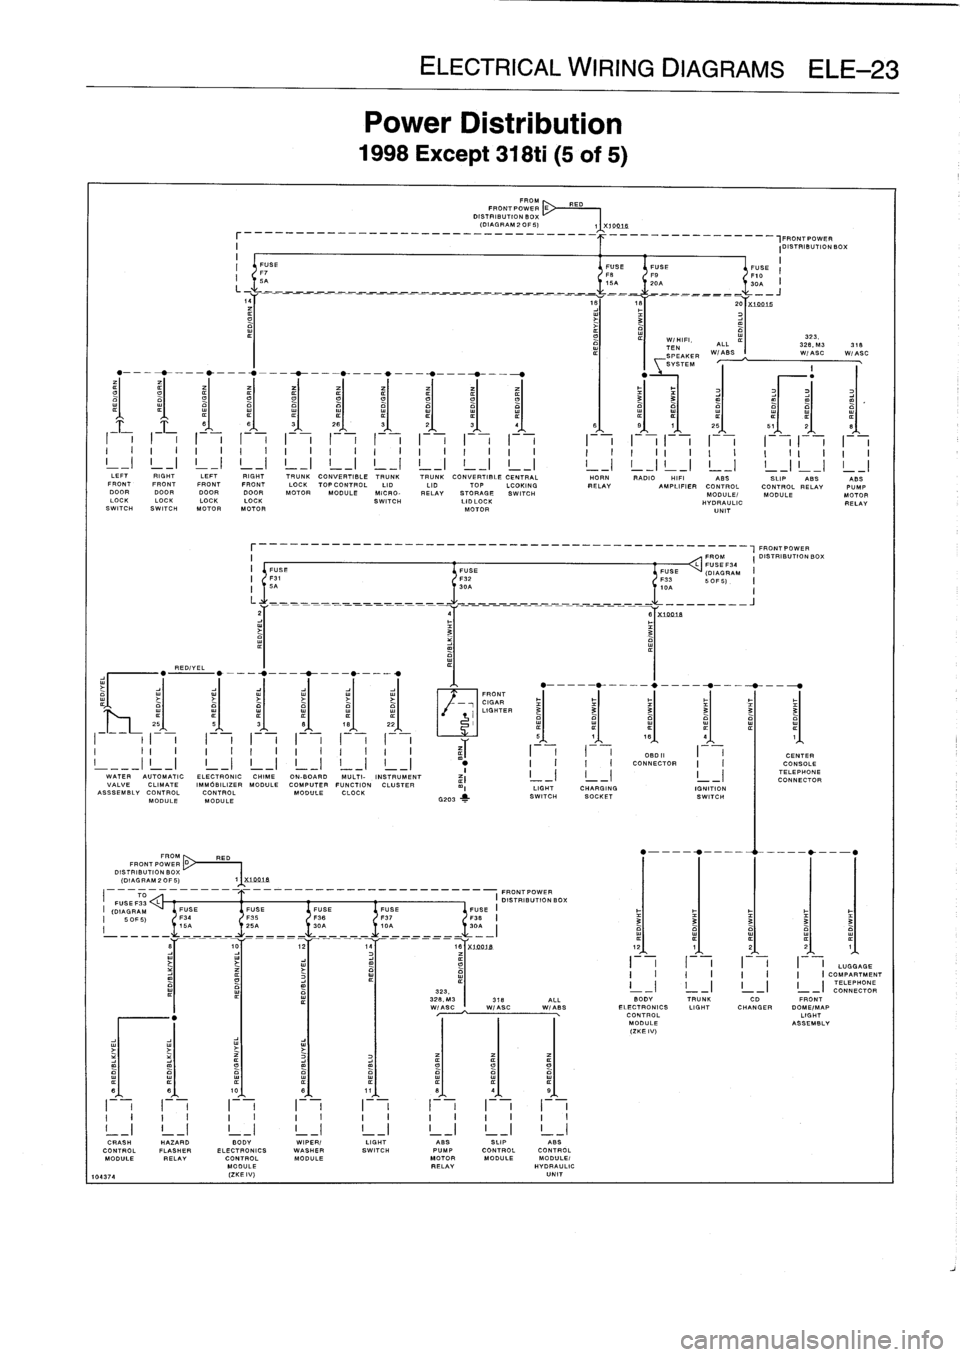 BMW 323i 1993 E36 Owners Guide 
REDIYEL

FROM
RED
FRONT
PO
WE
R
D~
DISTRIBUTION
BOX
(DIAGRAM
2
OF
5)

_
_
_
_
_
_
_
_
_
_
__
,FRONTPOWER
I

	

IDISTRIBUTIONBOX
I

	

II
FUSE

	

FUSEFUSE

	

FUSE
F7

	

FS

	

FO

	

F10
I
I
5A

	
